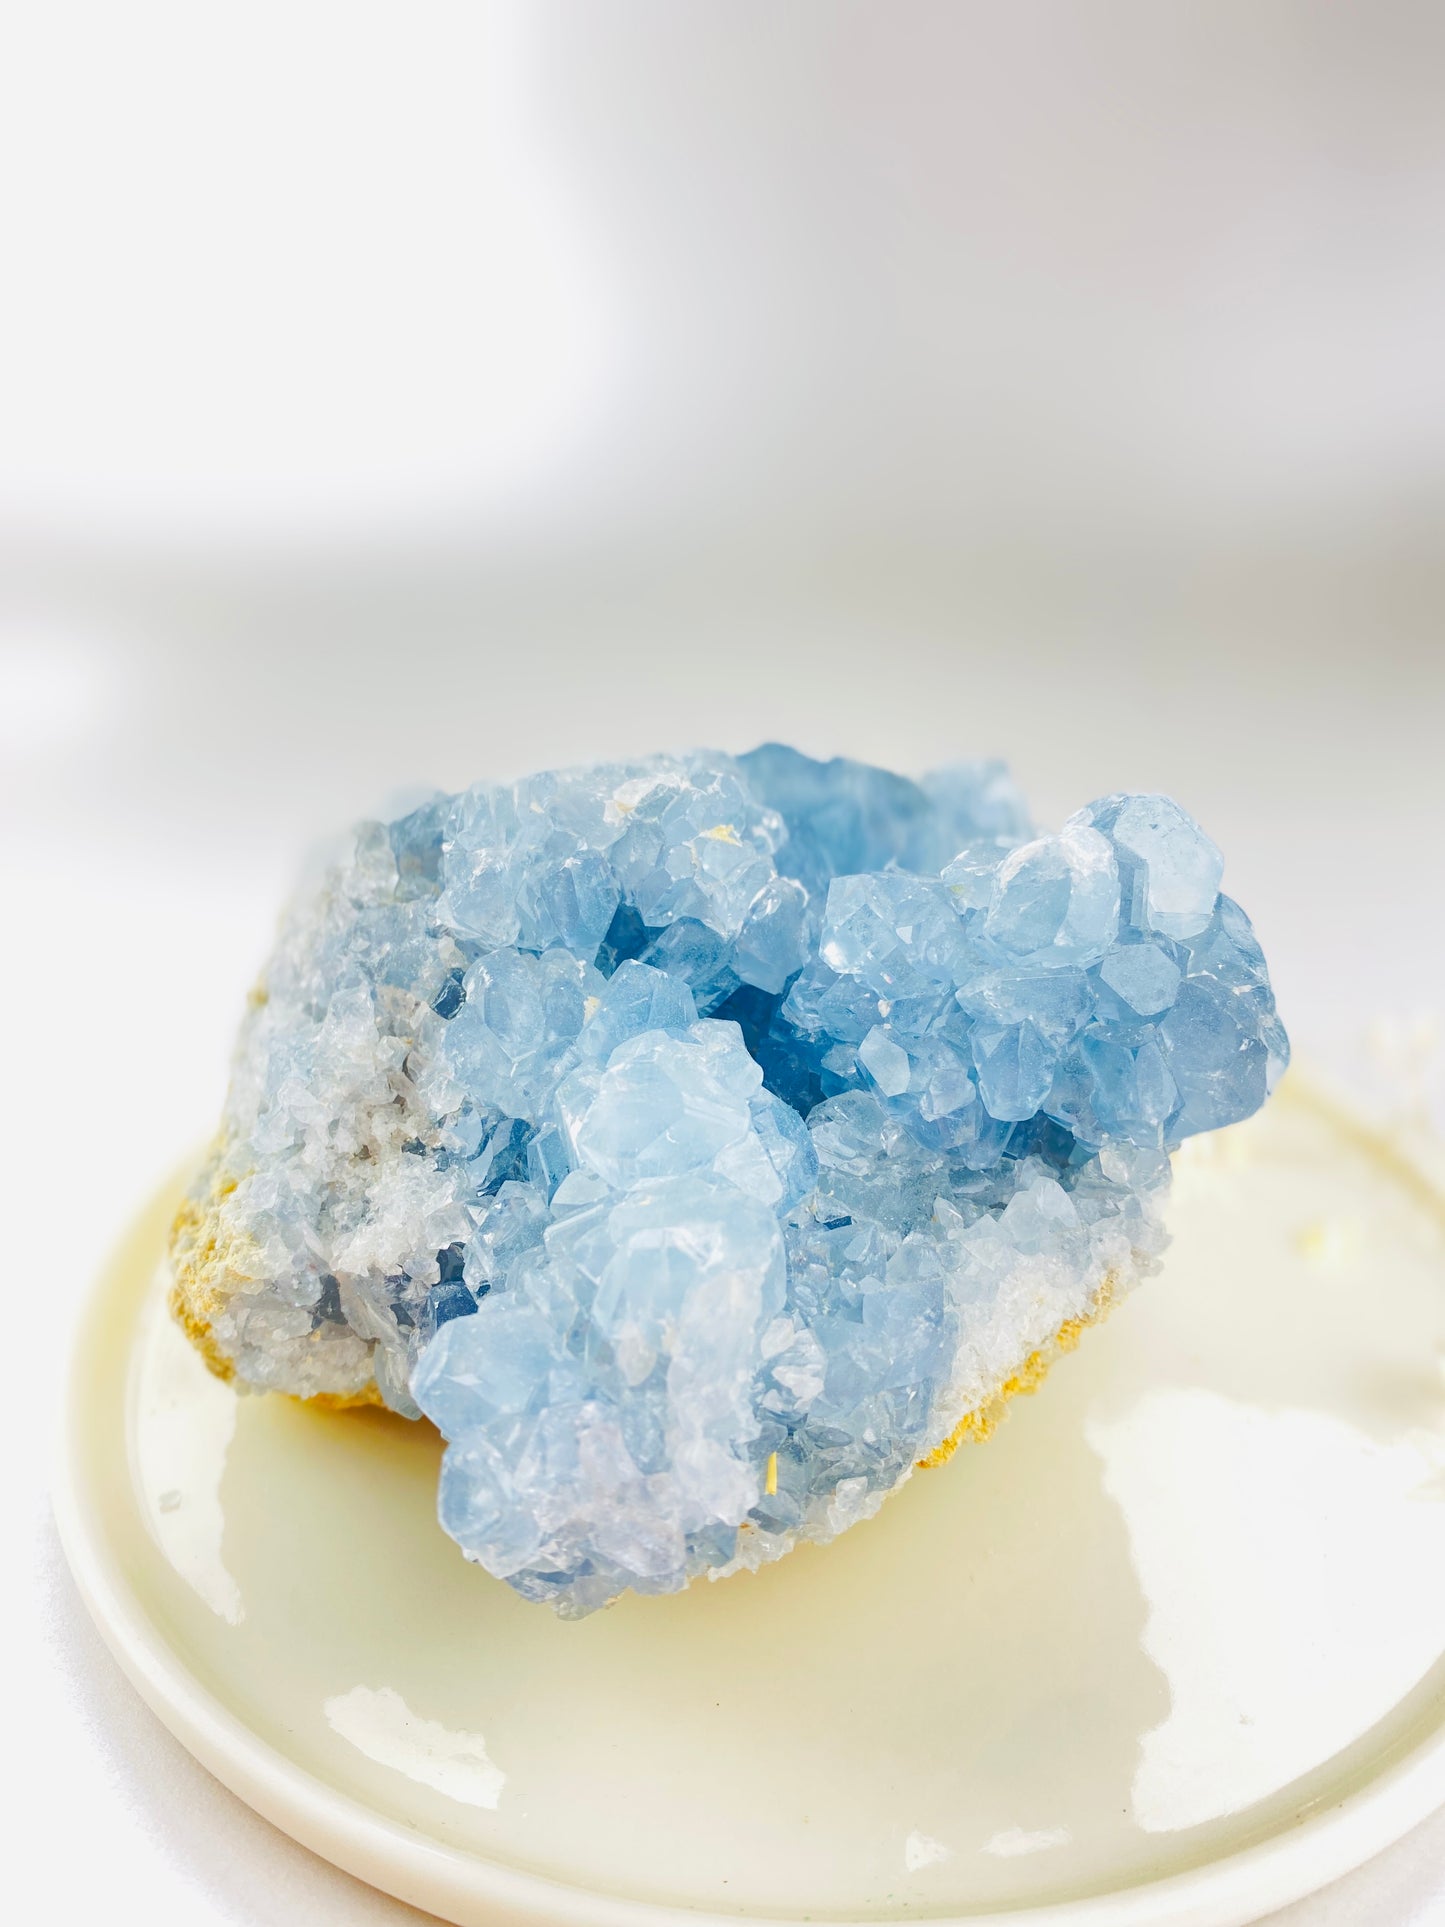 Celestite crystal, large cluster, A grade, Crystal to enhance intuition, promote calm and peace, connect to guides, Release negativity.